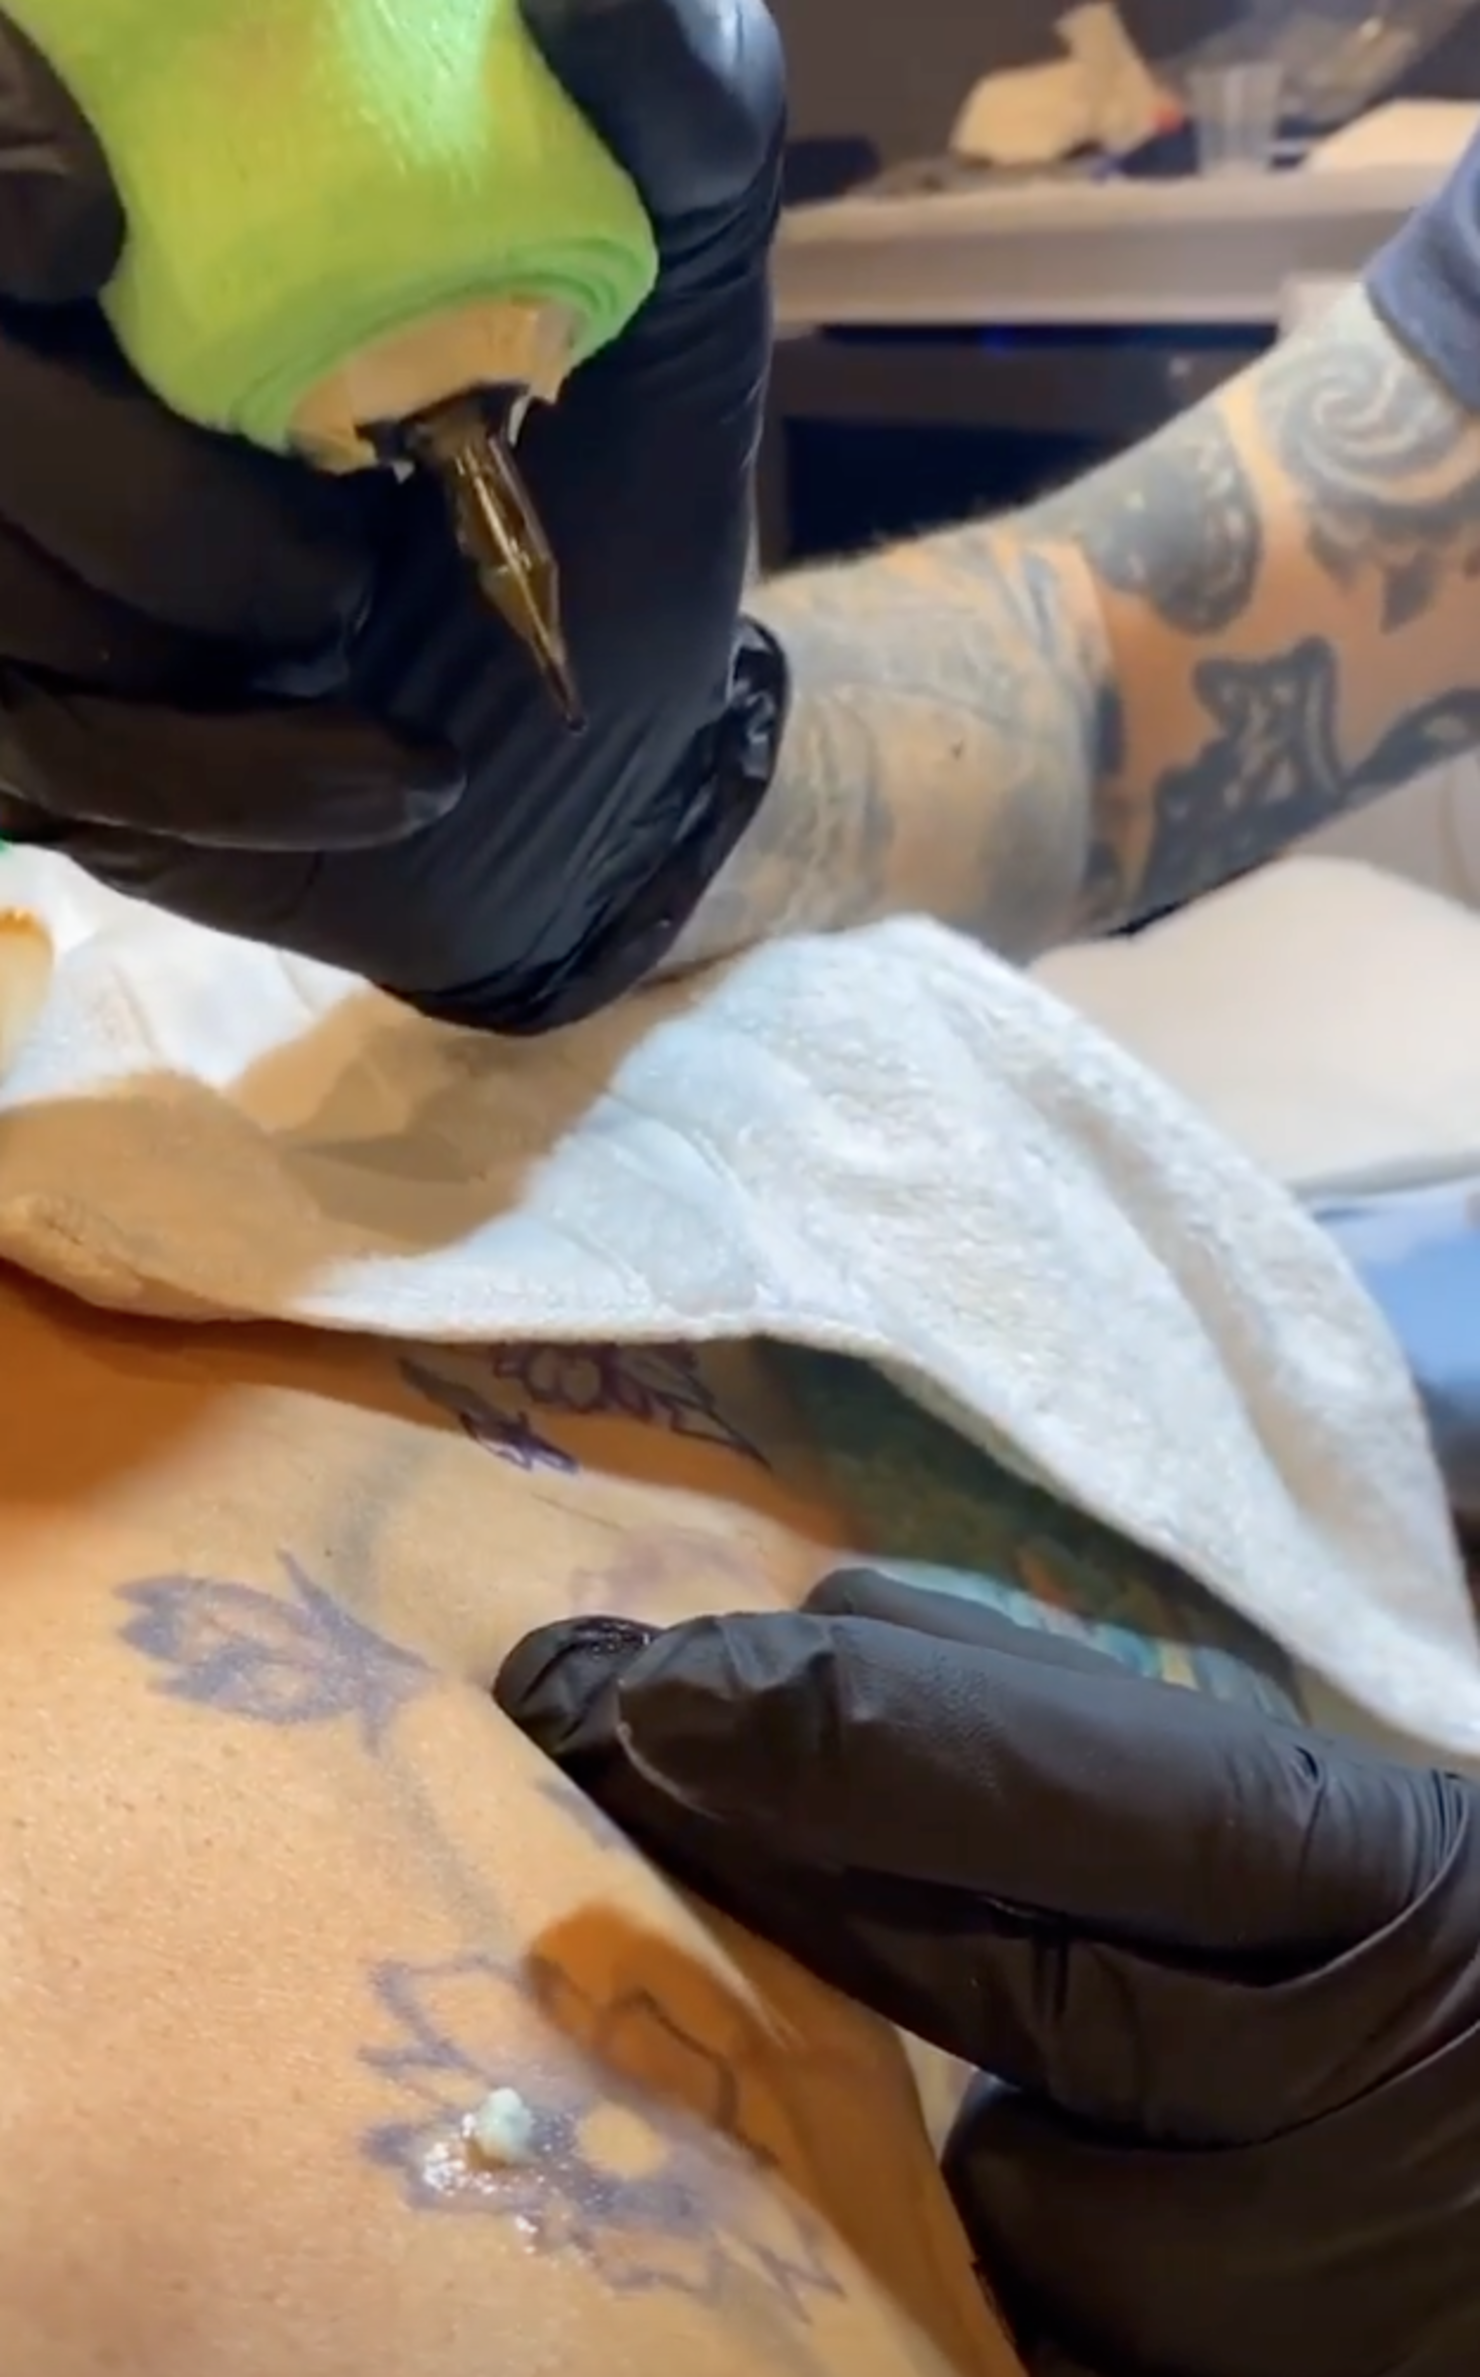 Cardi B Moans In Pain As She Gets Yet Another Massive Tattoo | iHeart